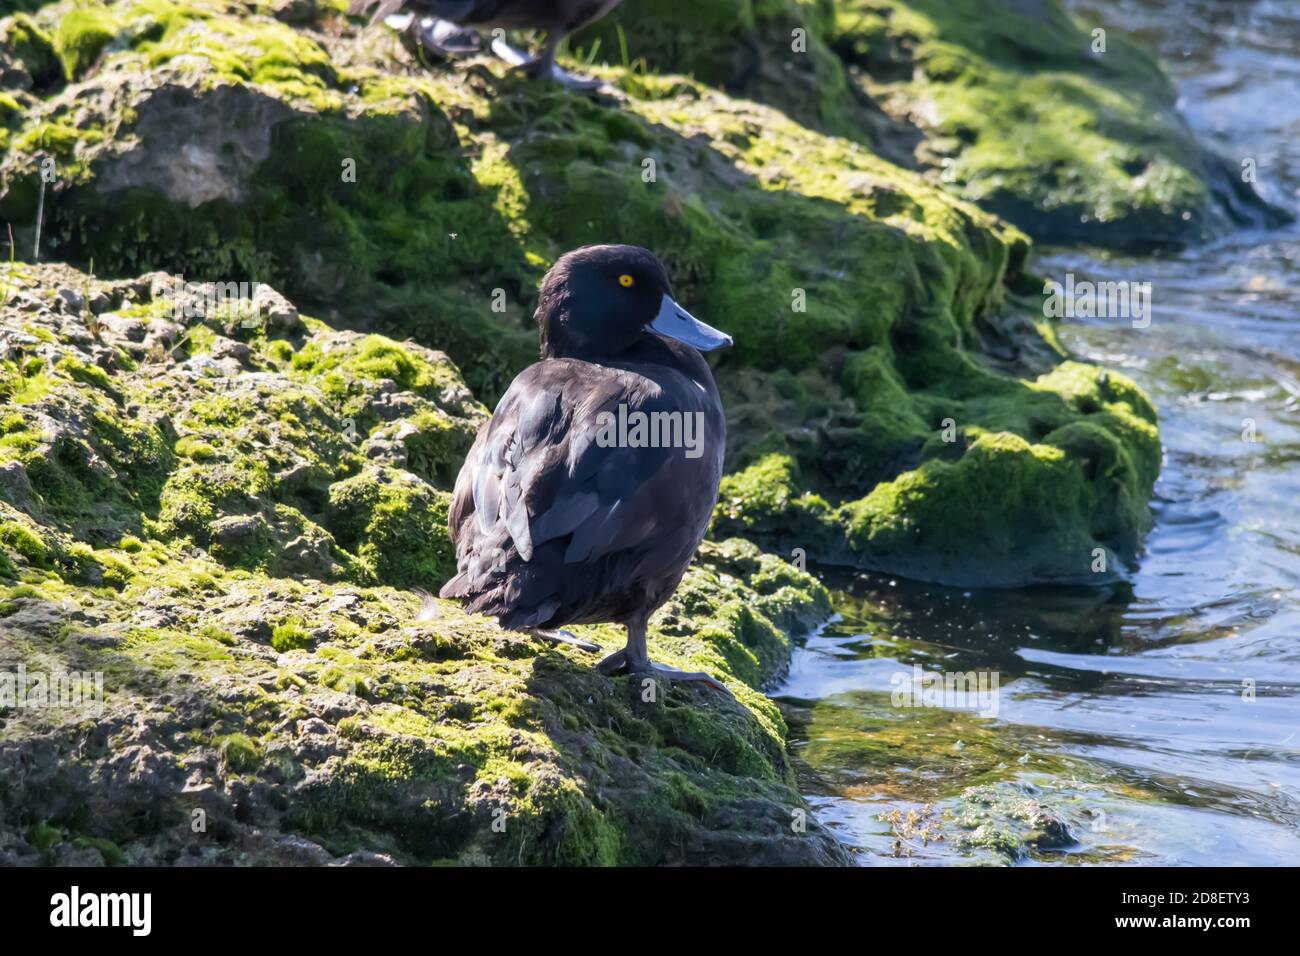 The New Zealand Scaup (Aythya novaeseelandiae) commonly known as a Black Teal, is a diving duck species of the genus Aythya. Stock Photo